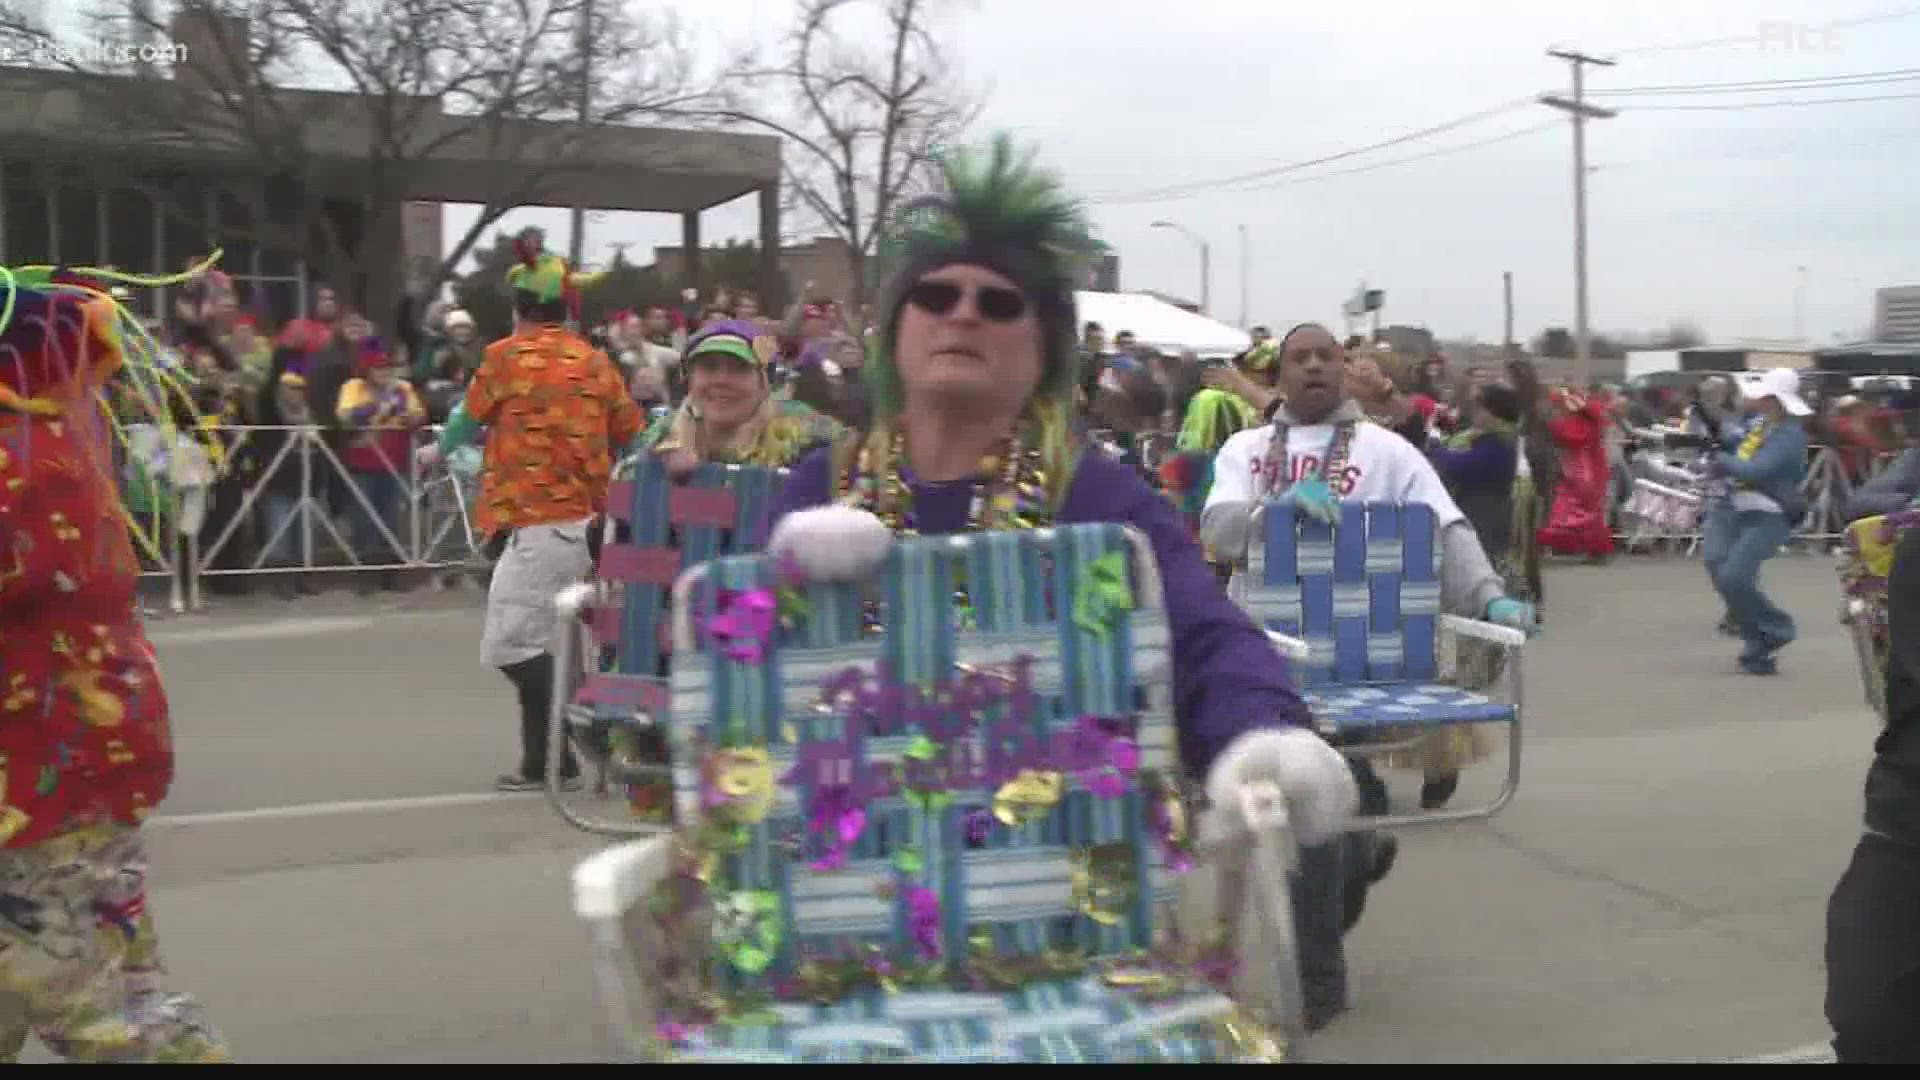 St. Louis' Mardi Gras celebration is often called the largest outside of New Orleans, but representatives say they've never made that claim.